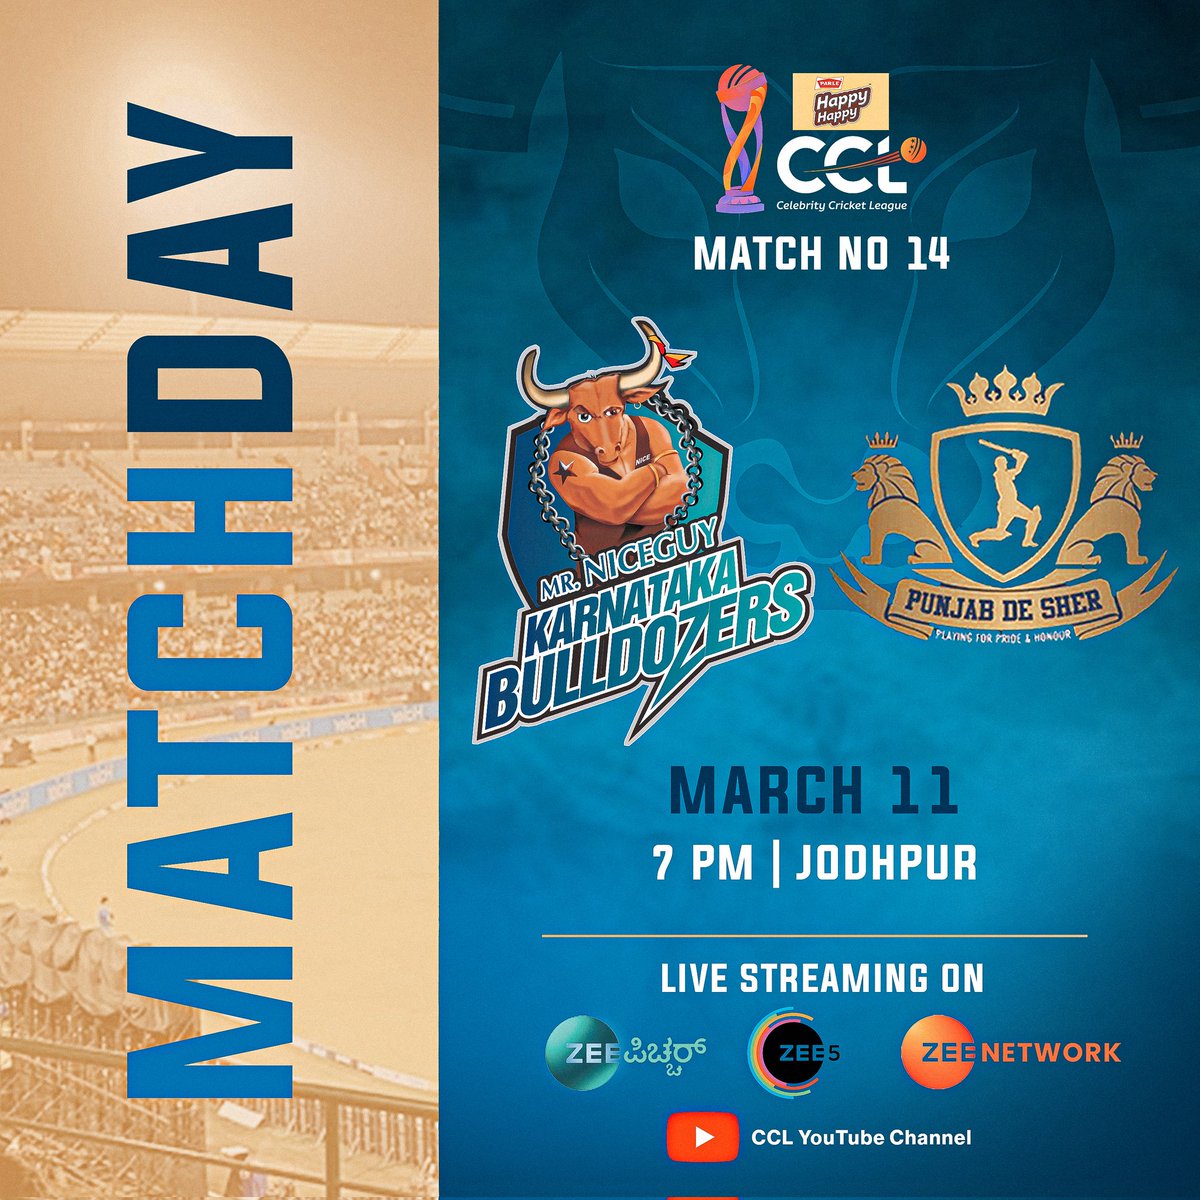 Match Day 🏏
We are taking on Punjab De Sher in our last league match here at the Barkatullah Khan Stadium in Jodhpur. 🏟️
We are looking forward to continuing the winning momentum in the tournament. 

Watch us live at 7:00 pm on ZeePicchar , Zee 5 and CCL YouTube channel.